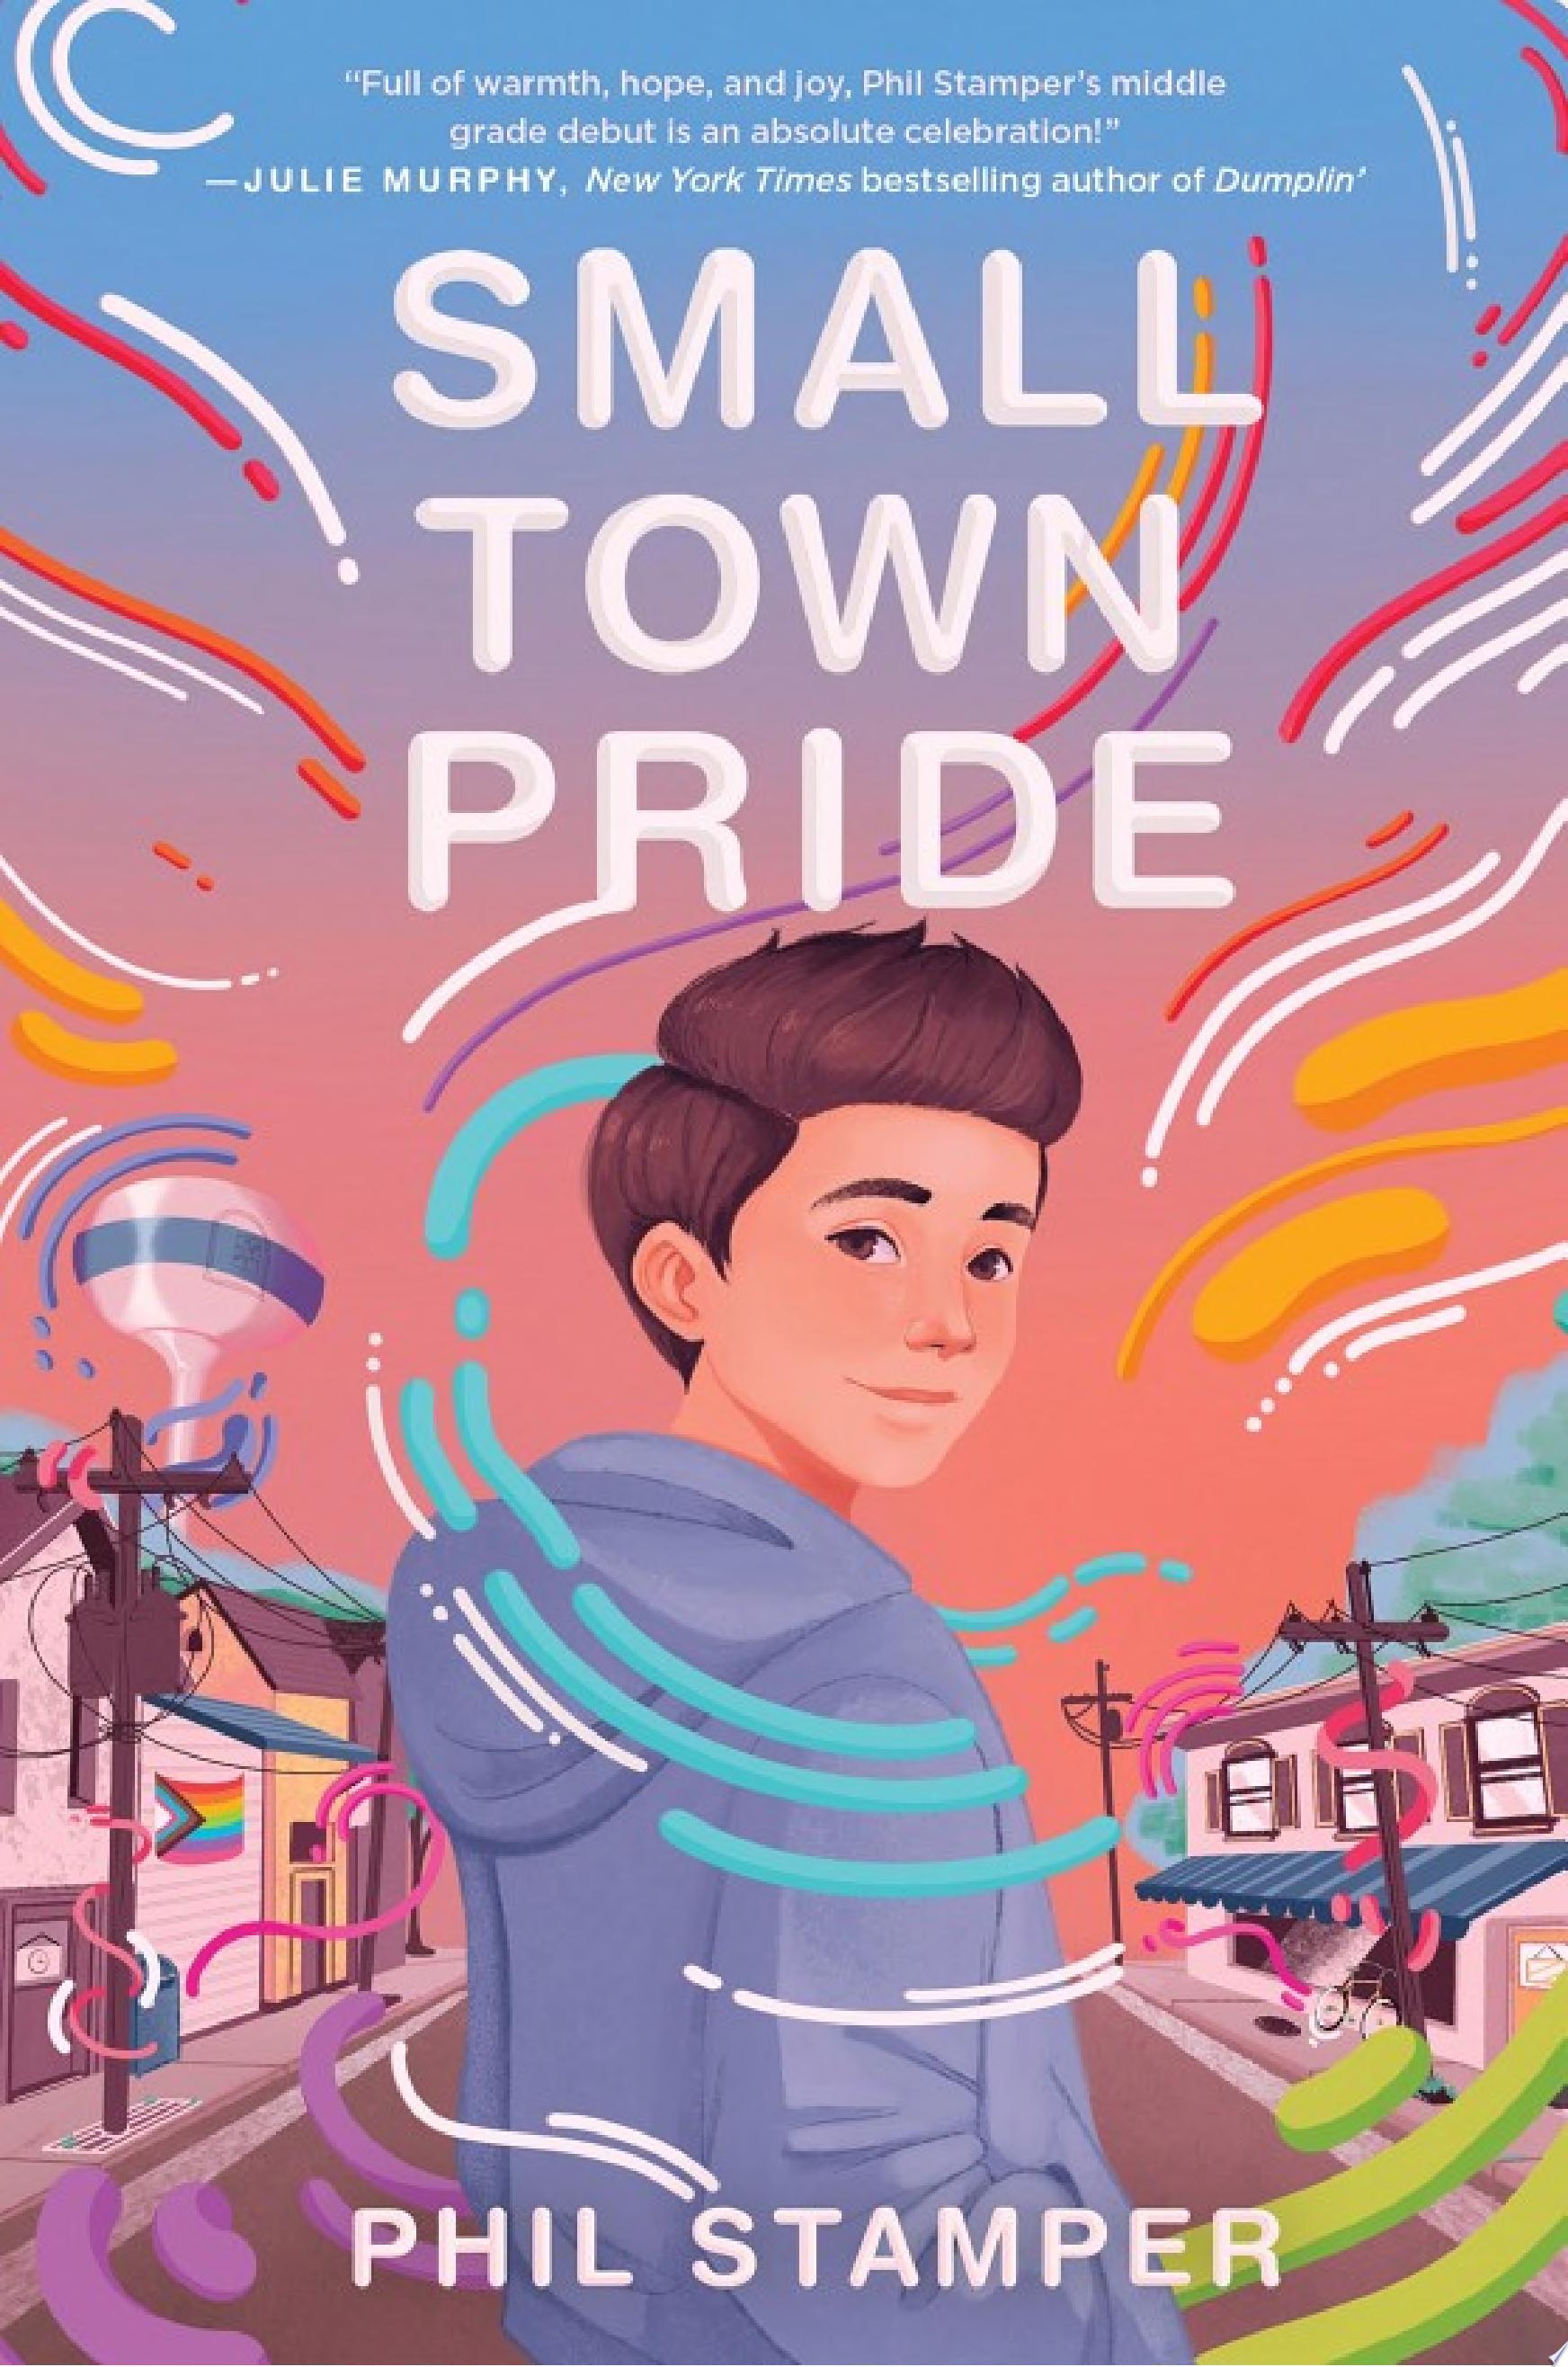 Image for "Small Town Pride"